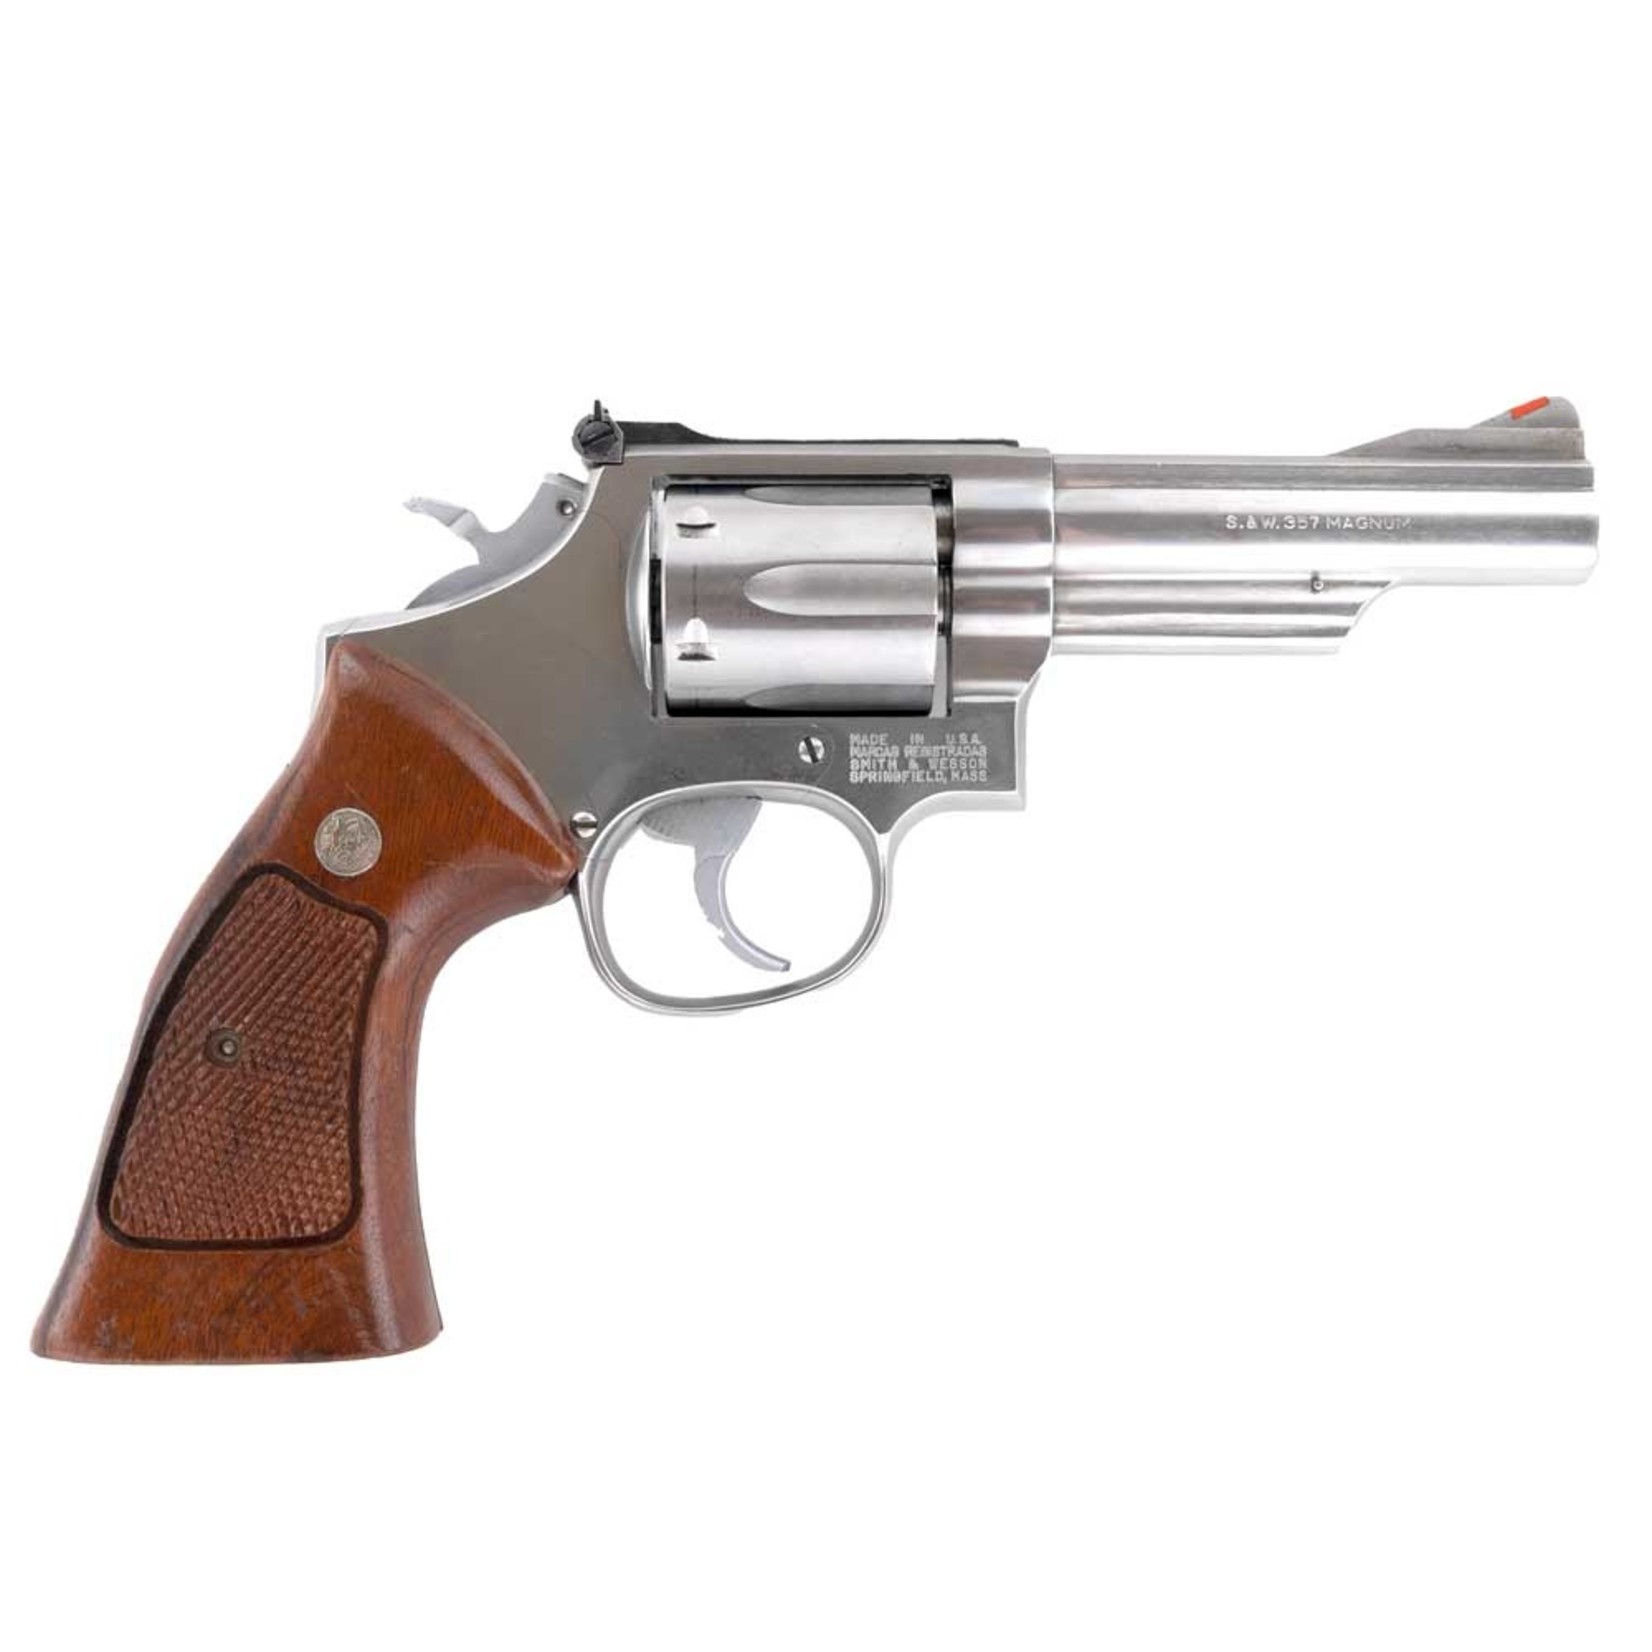 Smith and Wesson Smith & Wesson Model 66-2, 357 Magnum